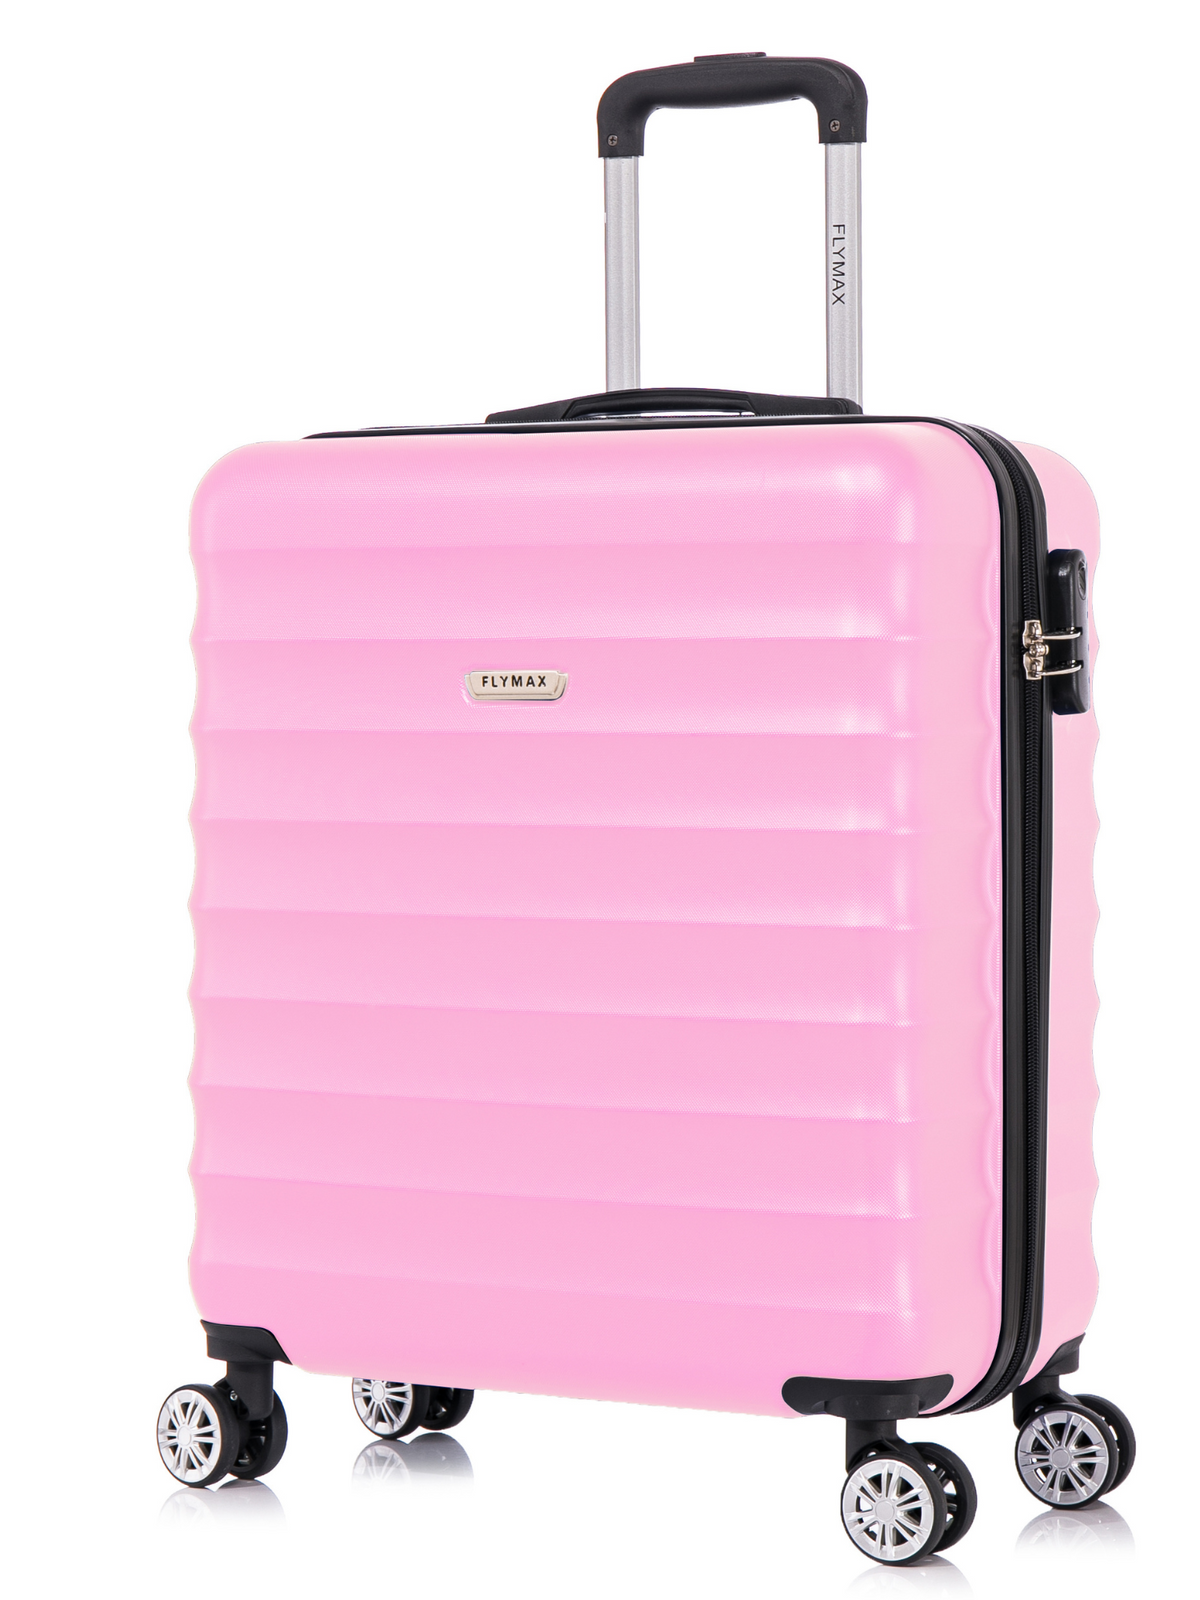 CABIN BAGS – Flymax Luggage